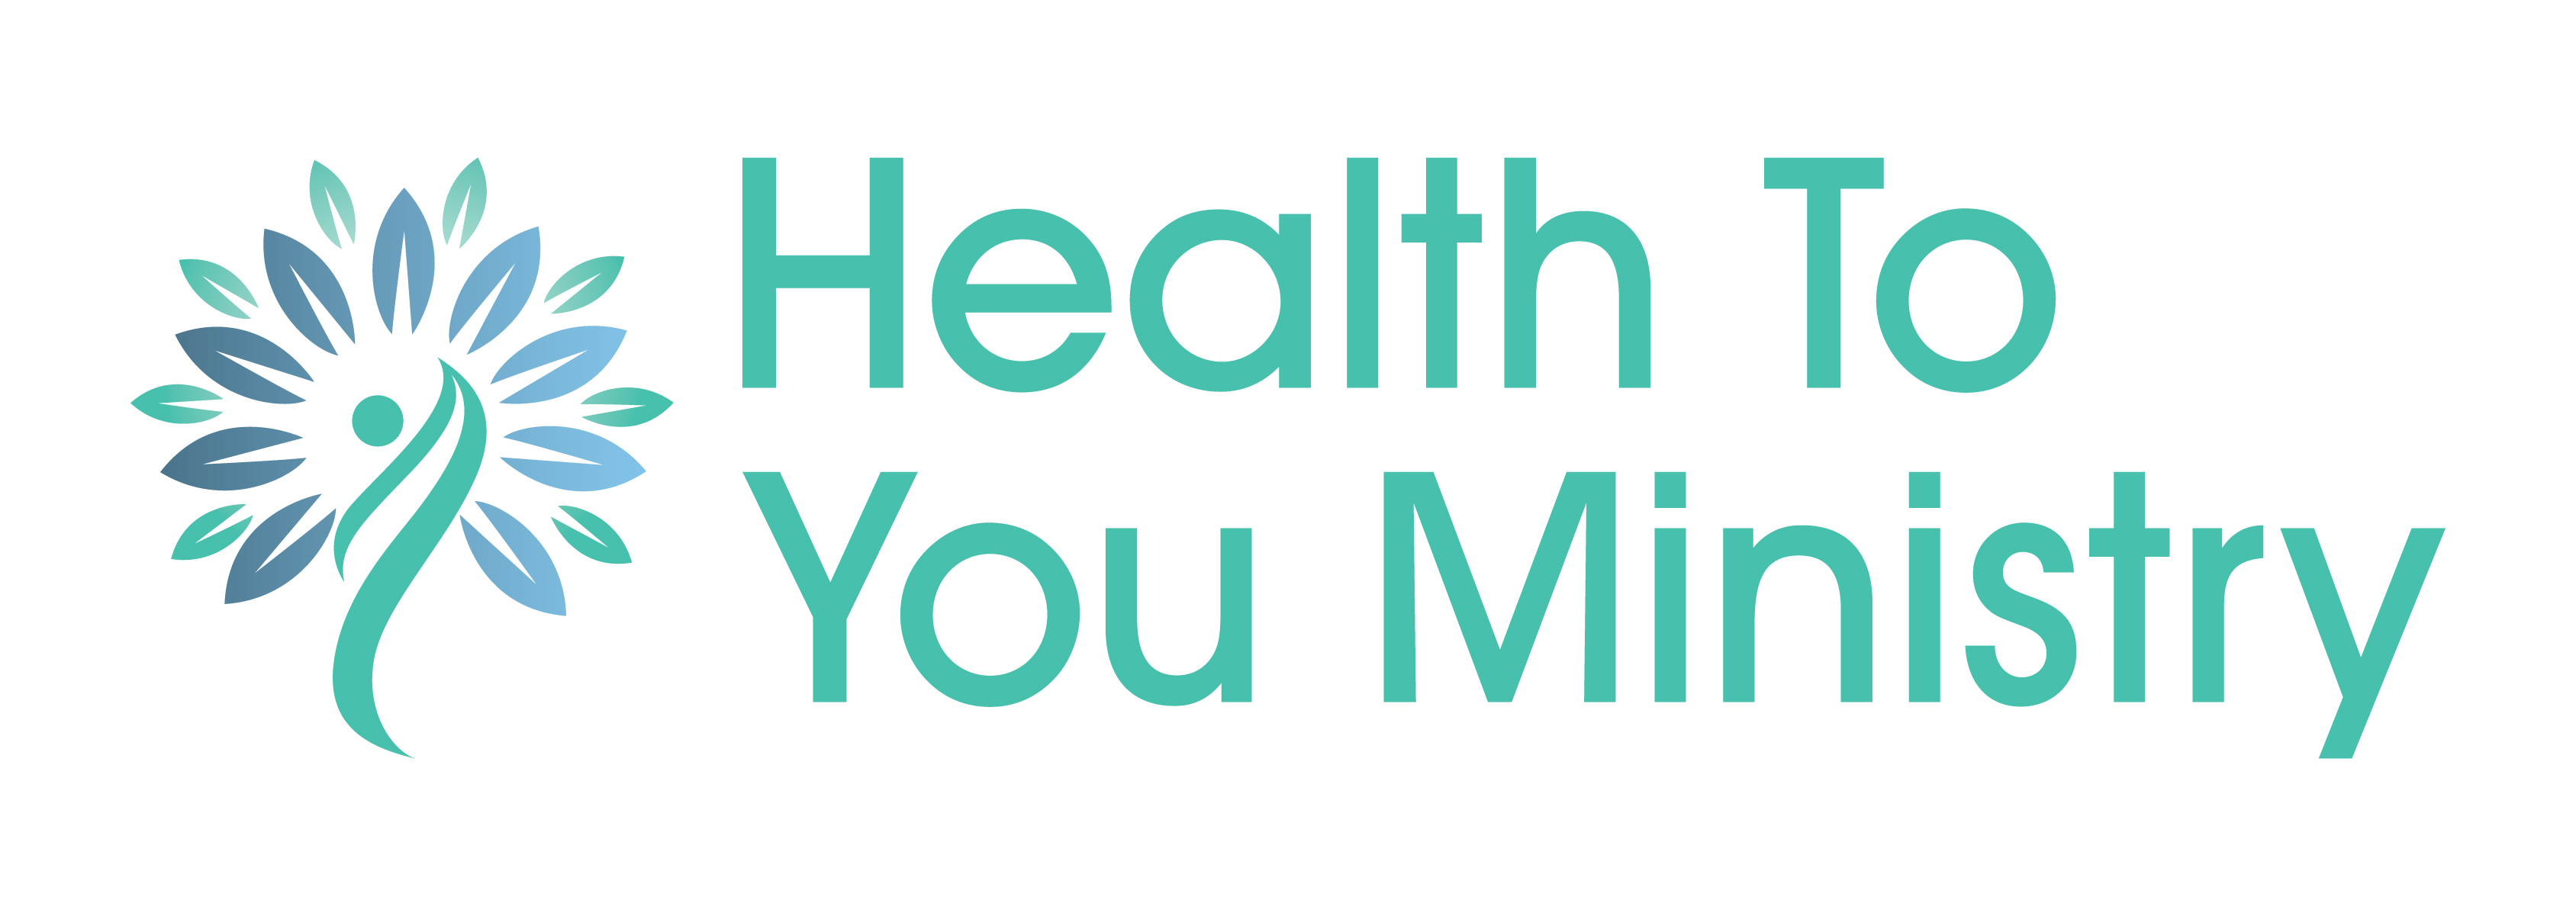 Health To You Ministry logo